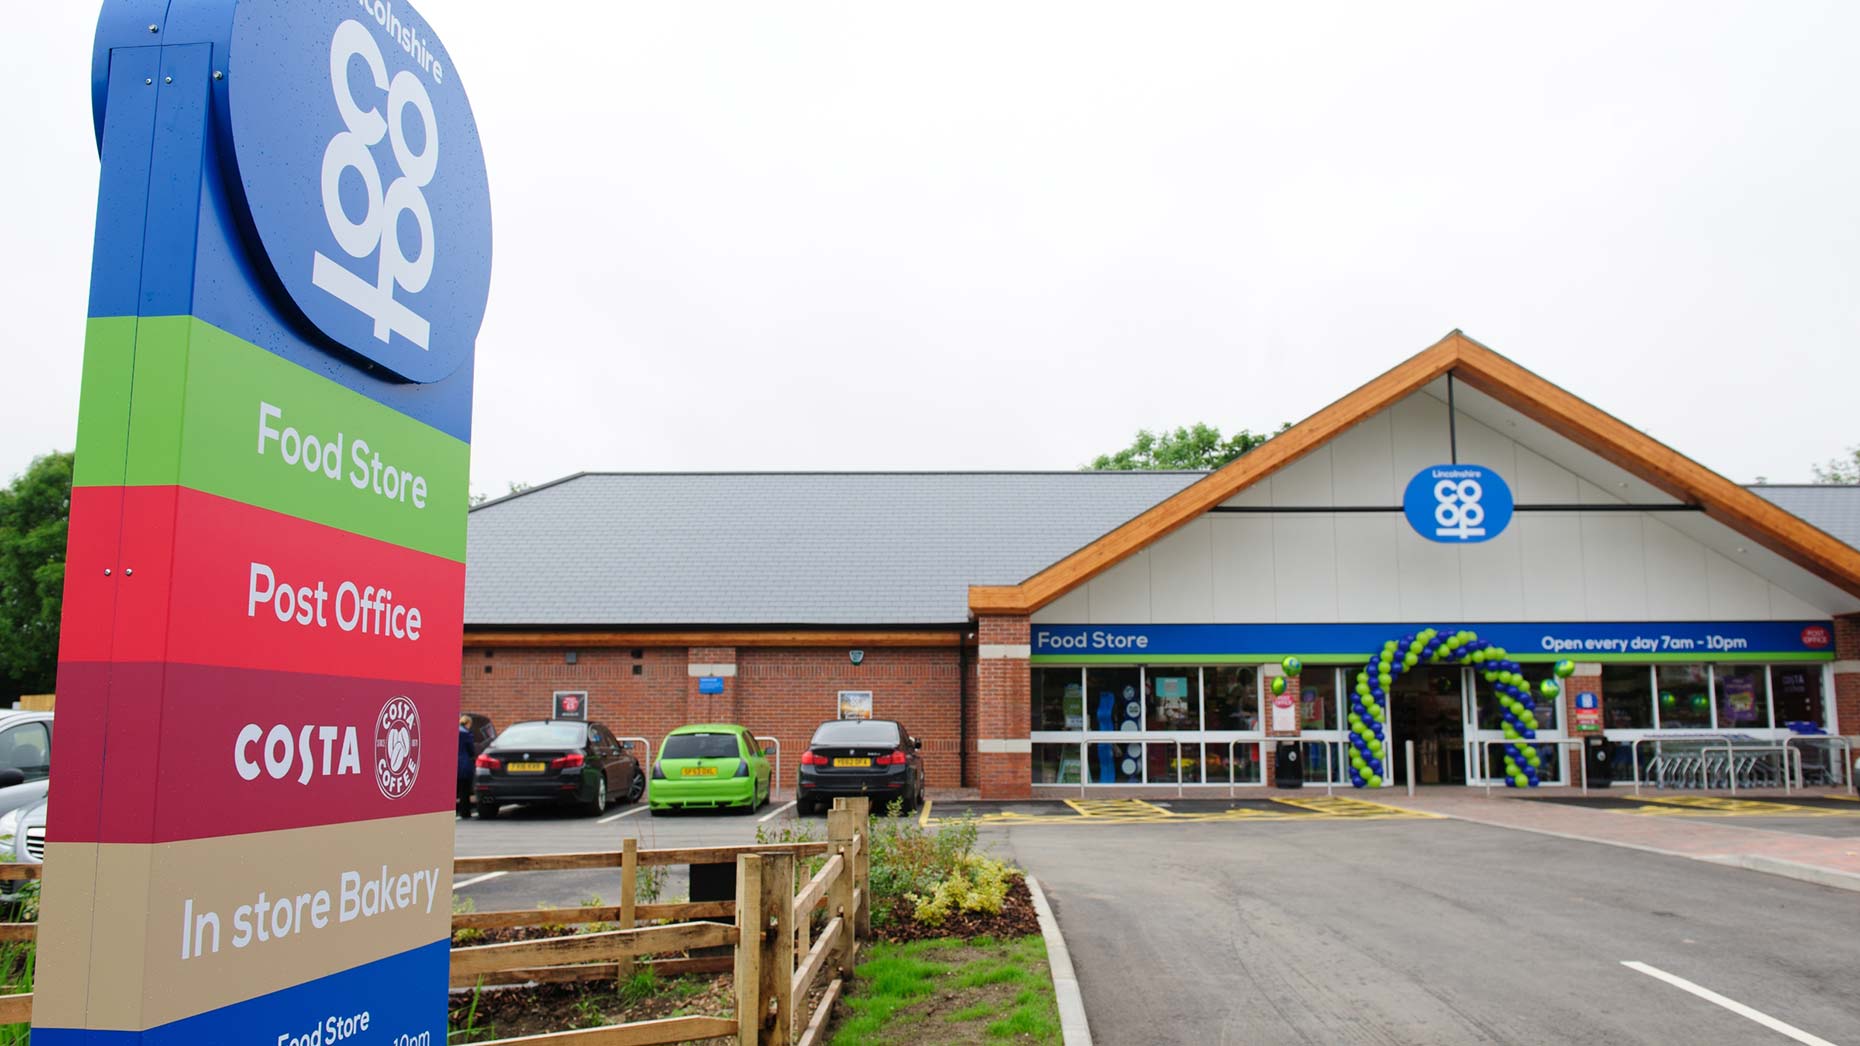 Lincolnshire Co-op opened a new food store and post office in Old Leake, near Boston, this year.